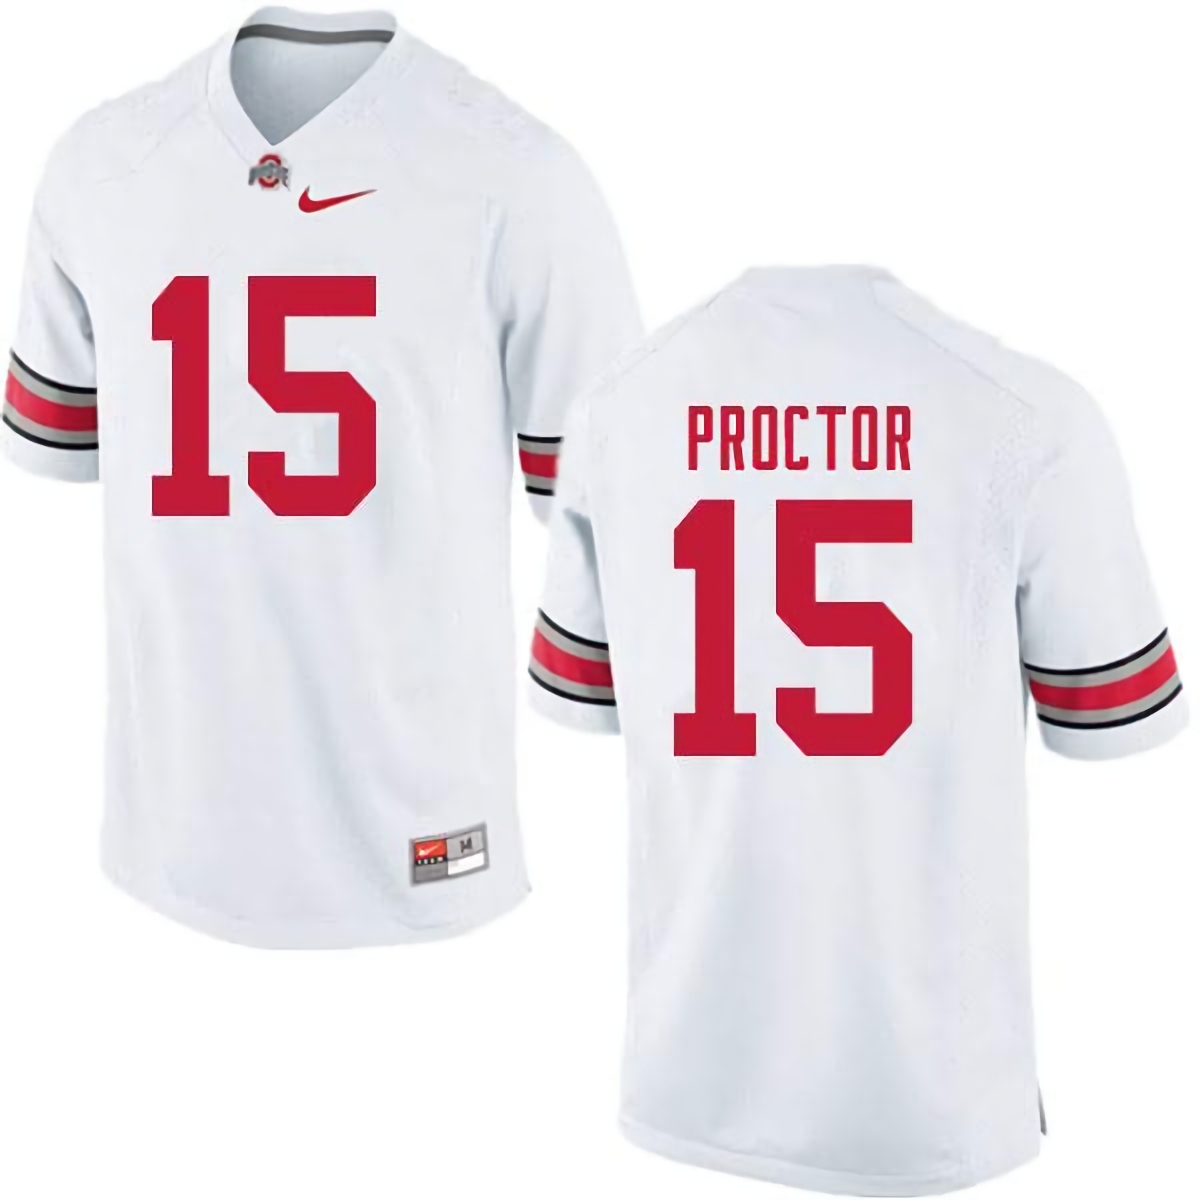 Josh Proctor Ohio State Buckeyes Men's NCAA #15 Nike White College Stitched Football Jersey AHE0656XP